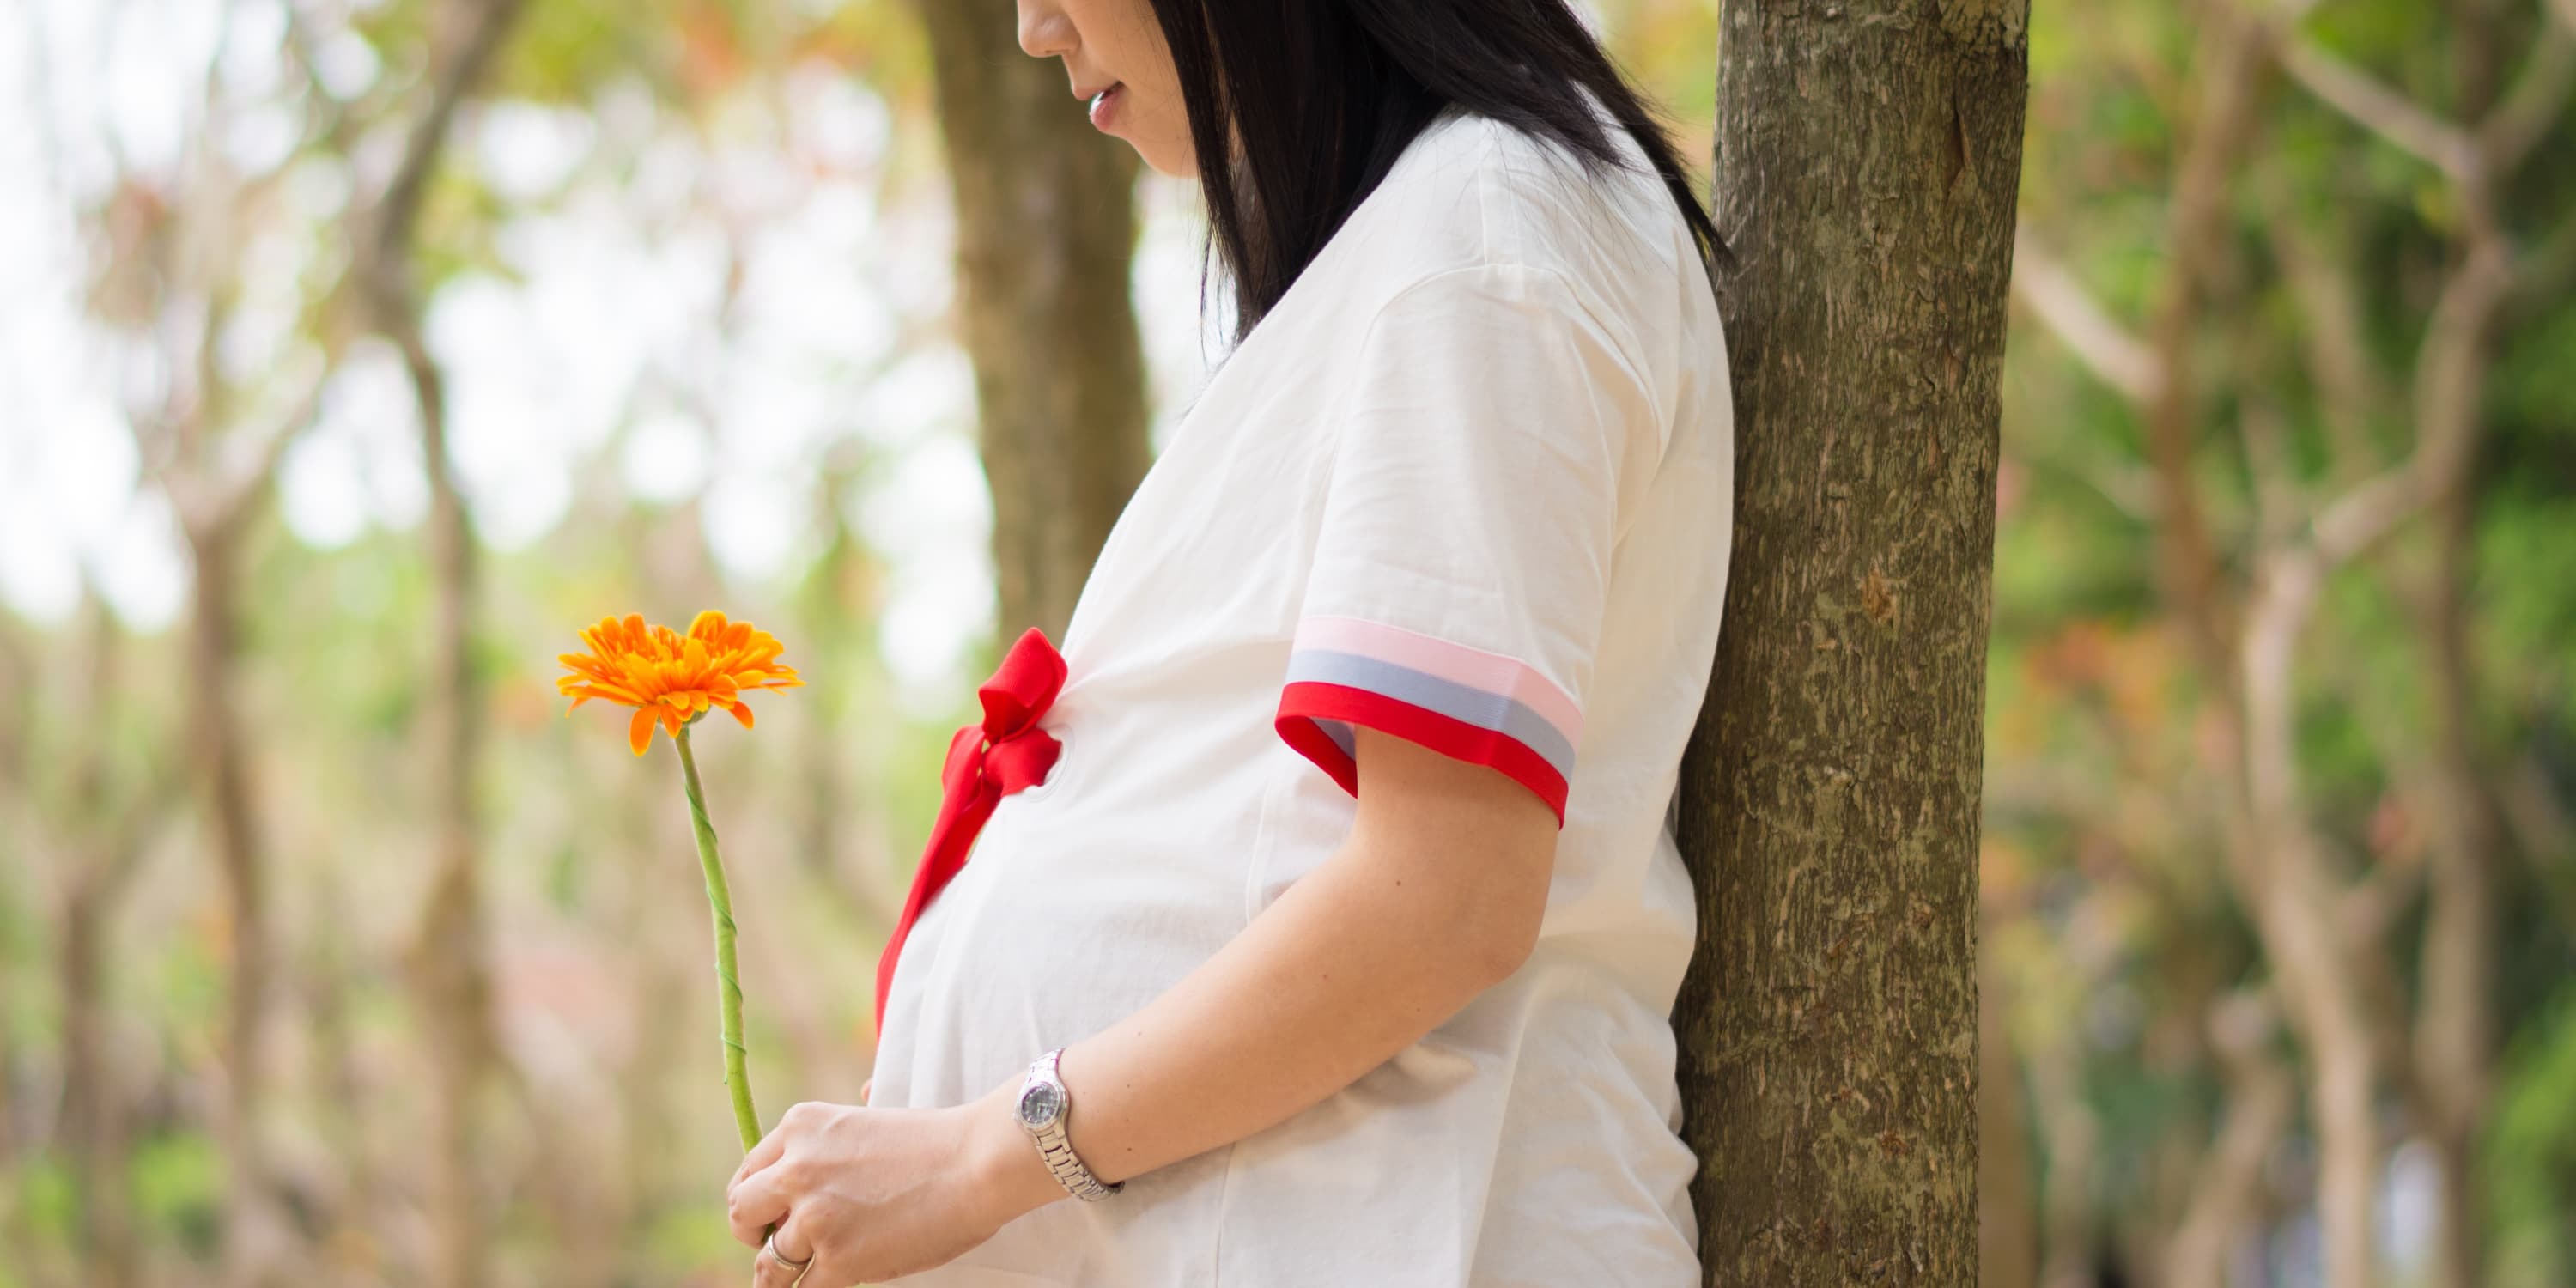 Profile: pregnant woman standing under a tree holding a flower